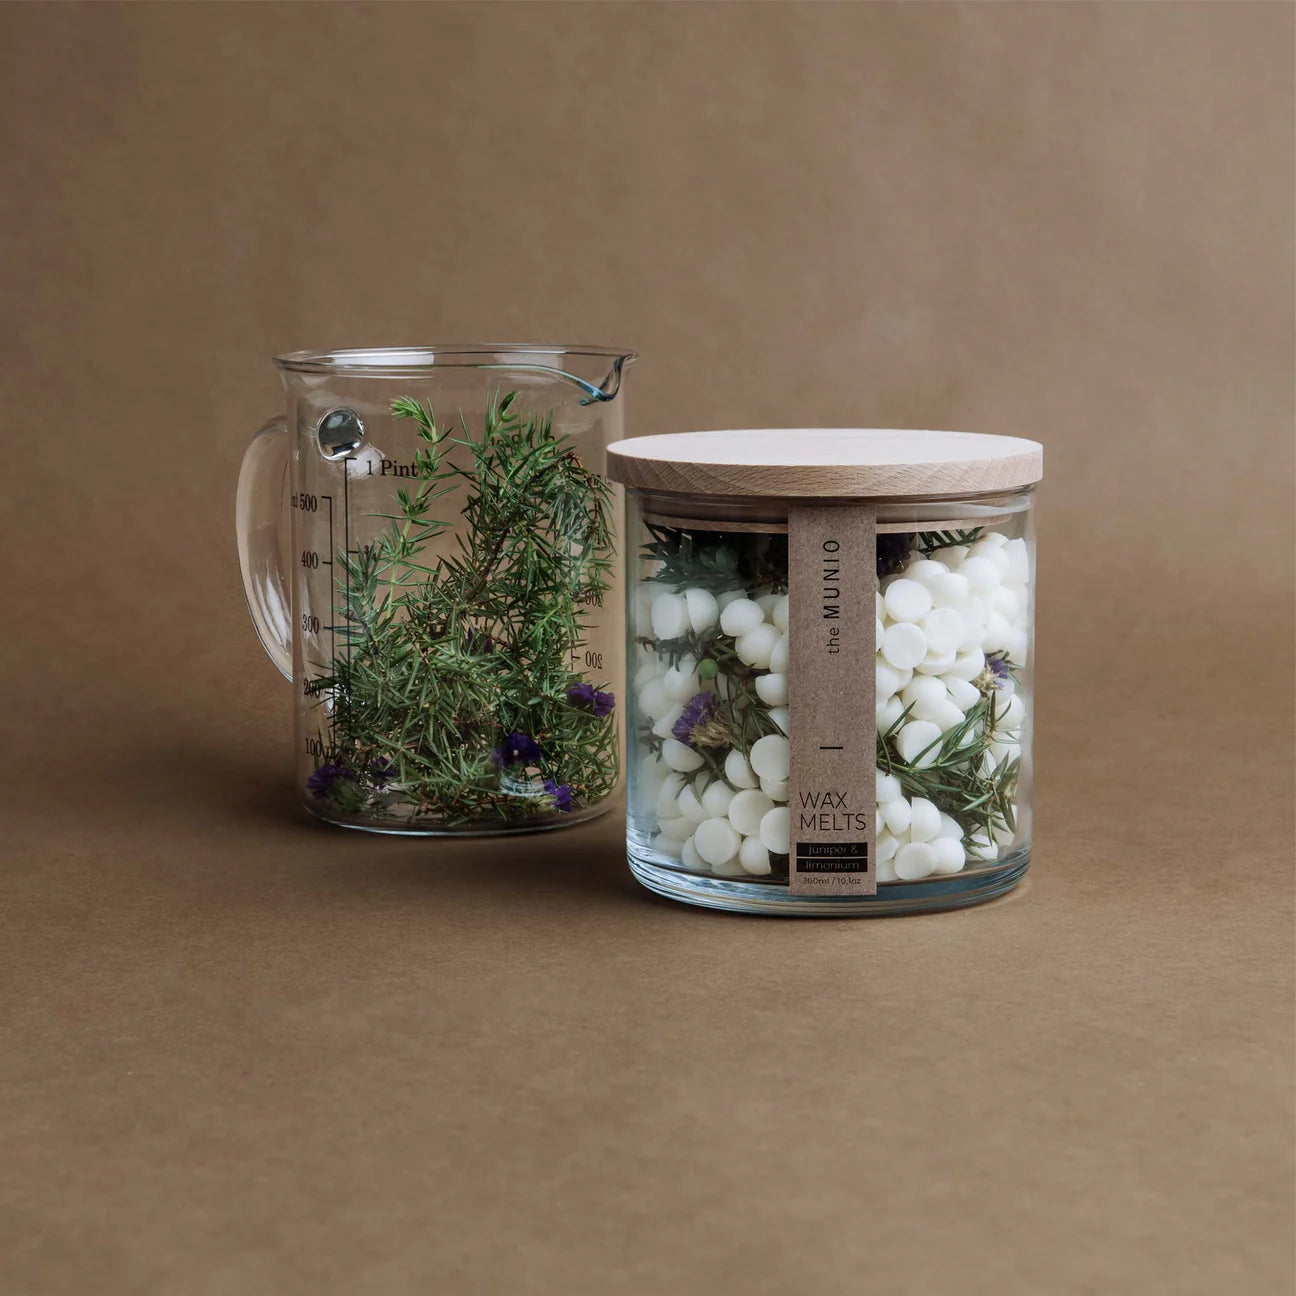 Juniper & limonium candle in a glass votive with wooden wicks – the MUNIO